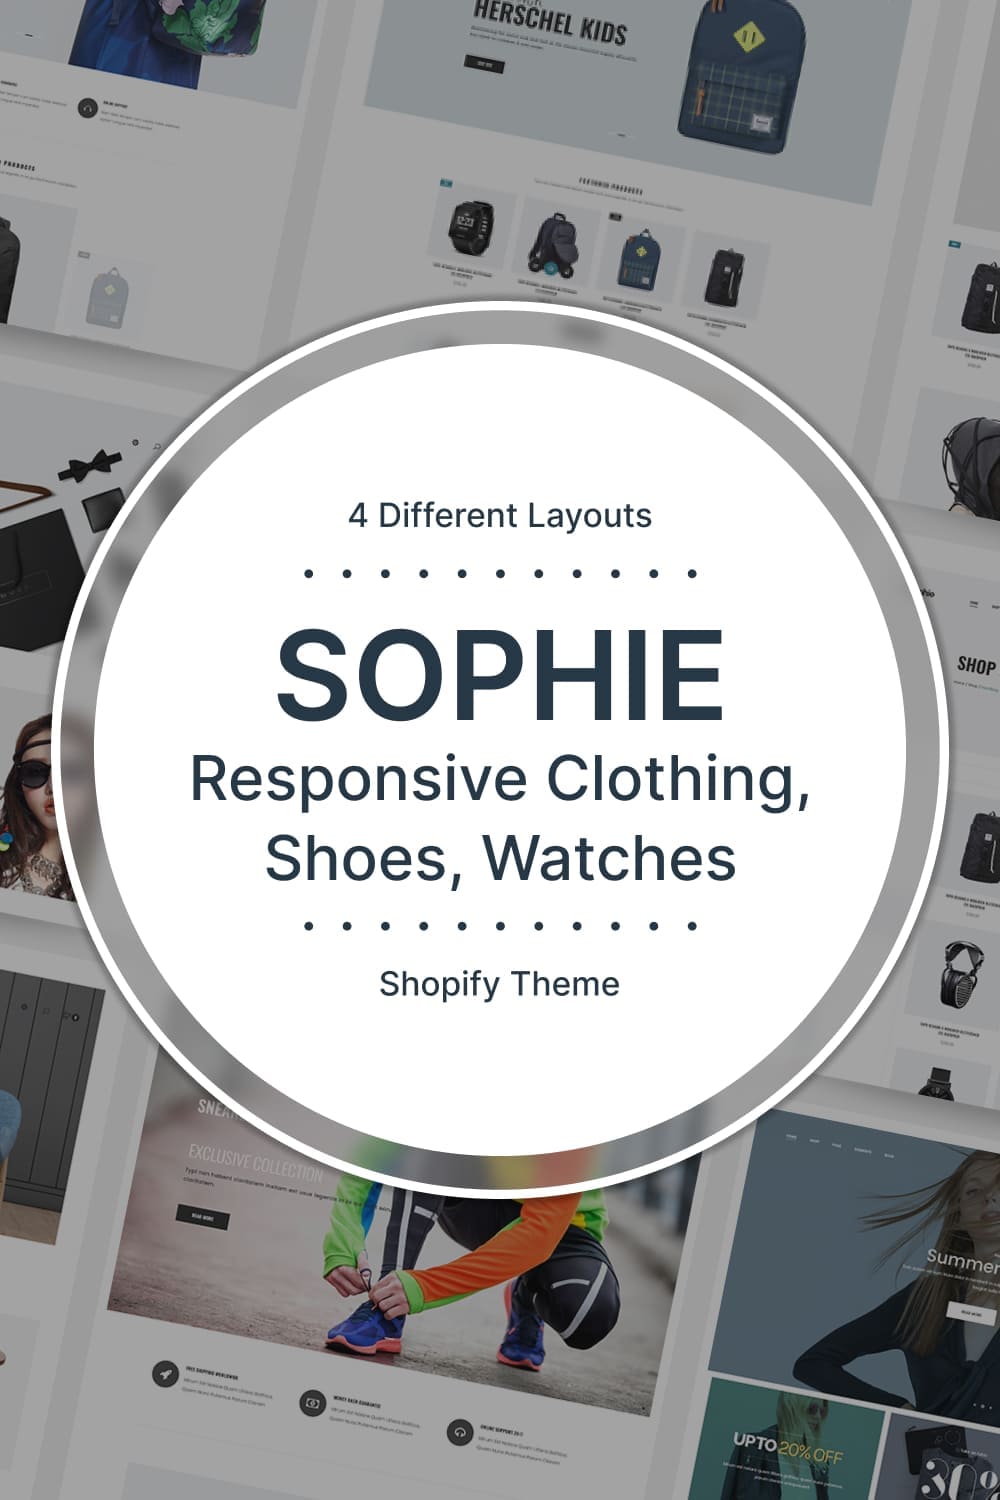 Sophie responsive clothing, picture for pinterest 1000x1500.